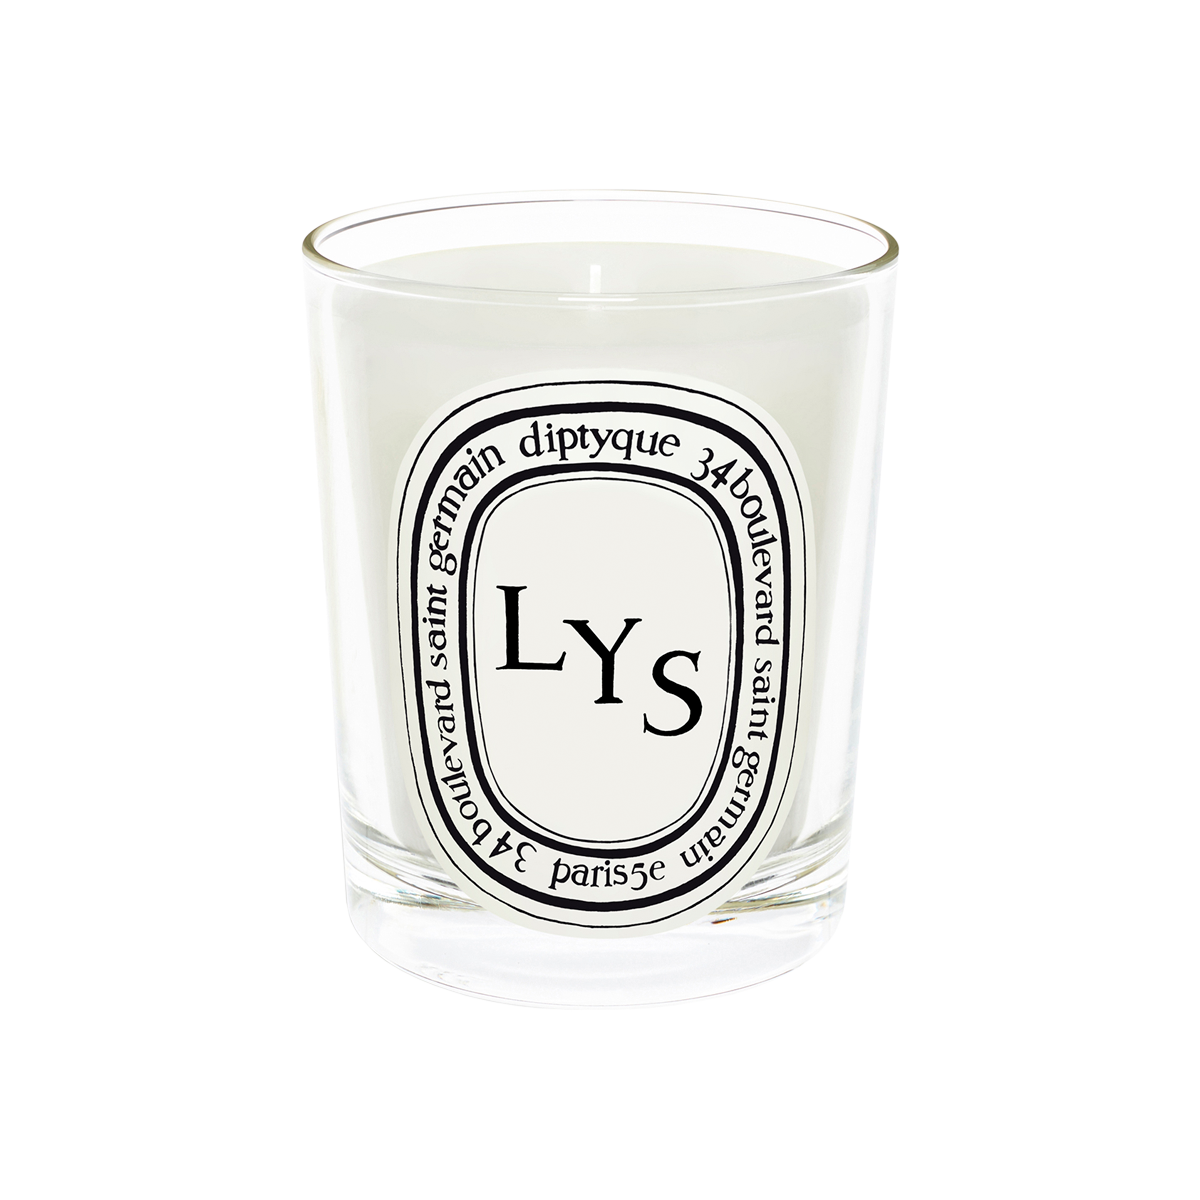 Diptyque - Lys Scented Candle